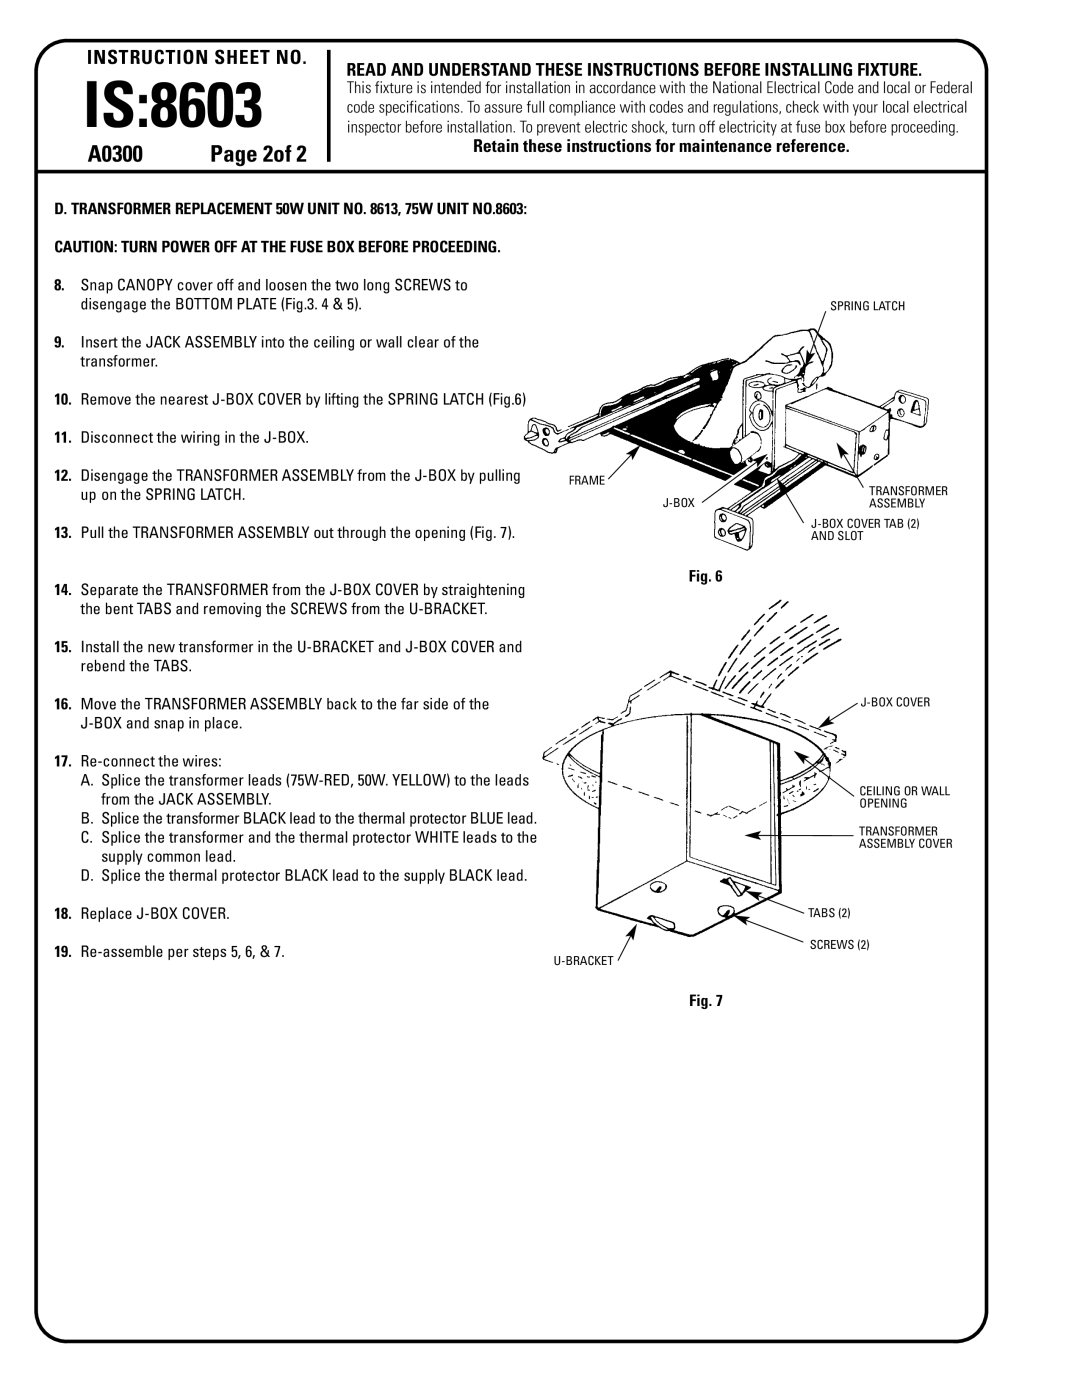 Lightolier instruction sheet IS:8603, A0300, Instruction Sheet No, Page 2of 